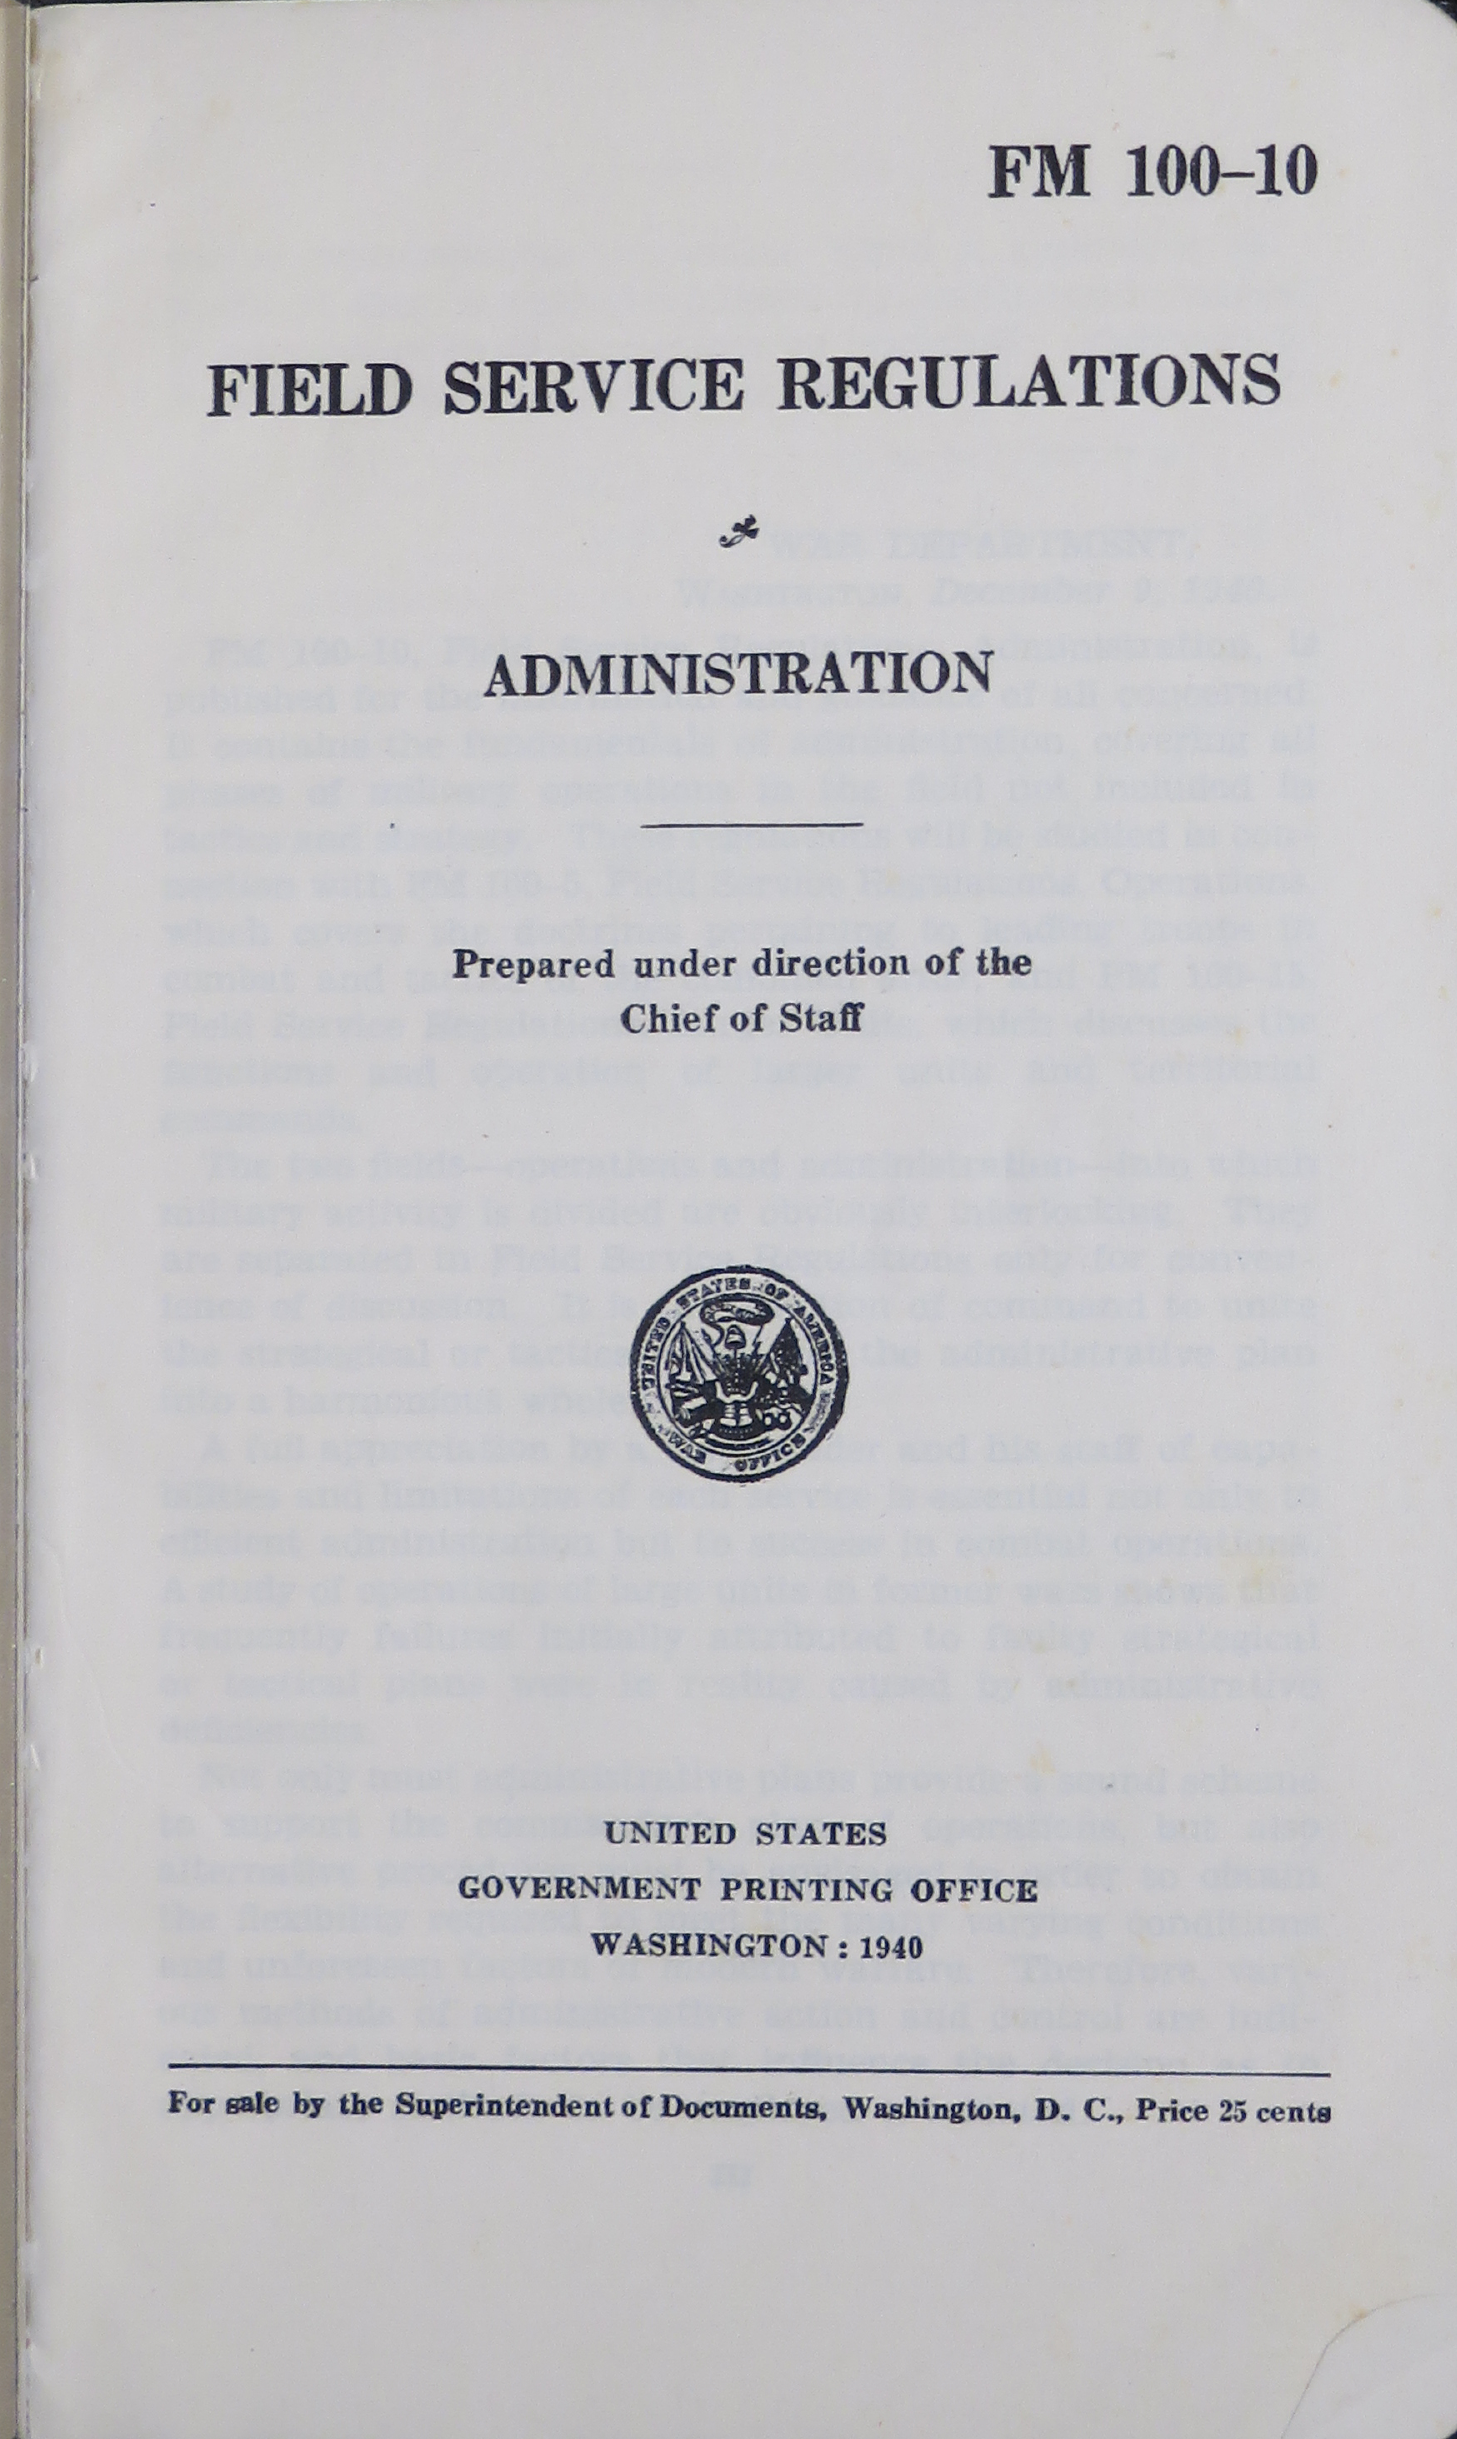 Sample page 3 from AirCorps Library document: Field Service Regulations for Administration